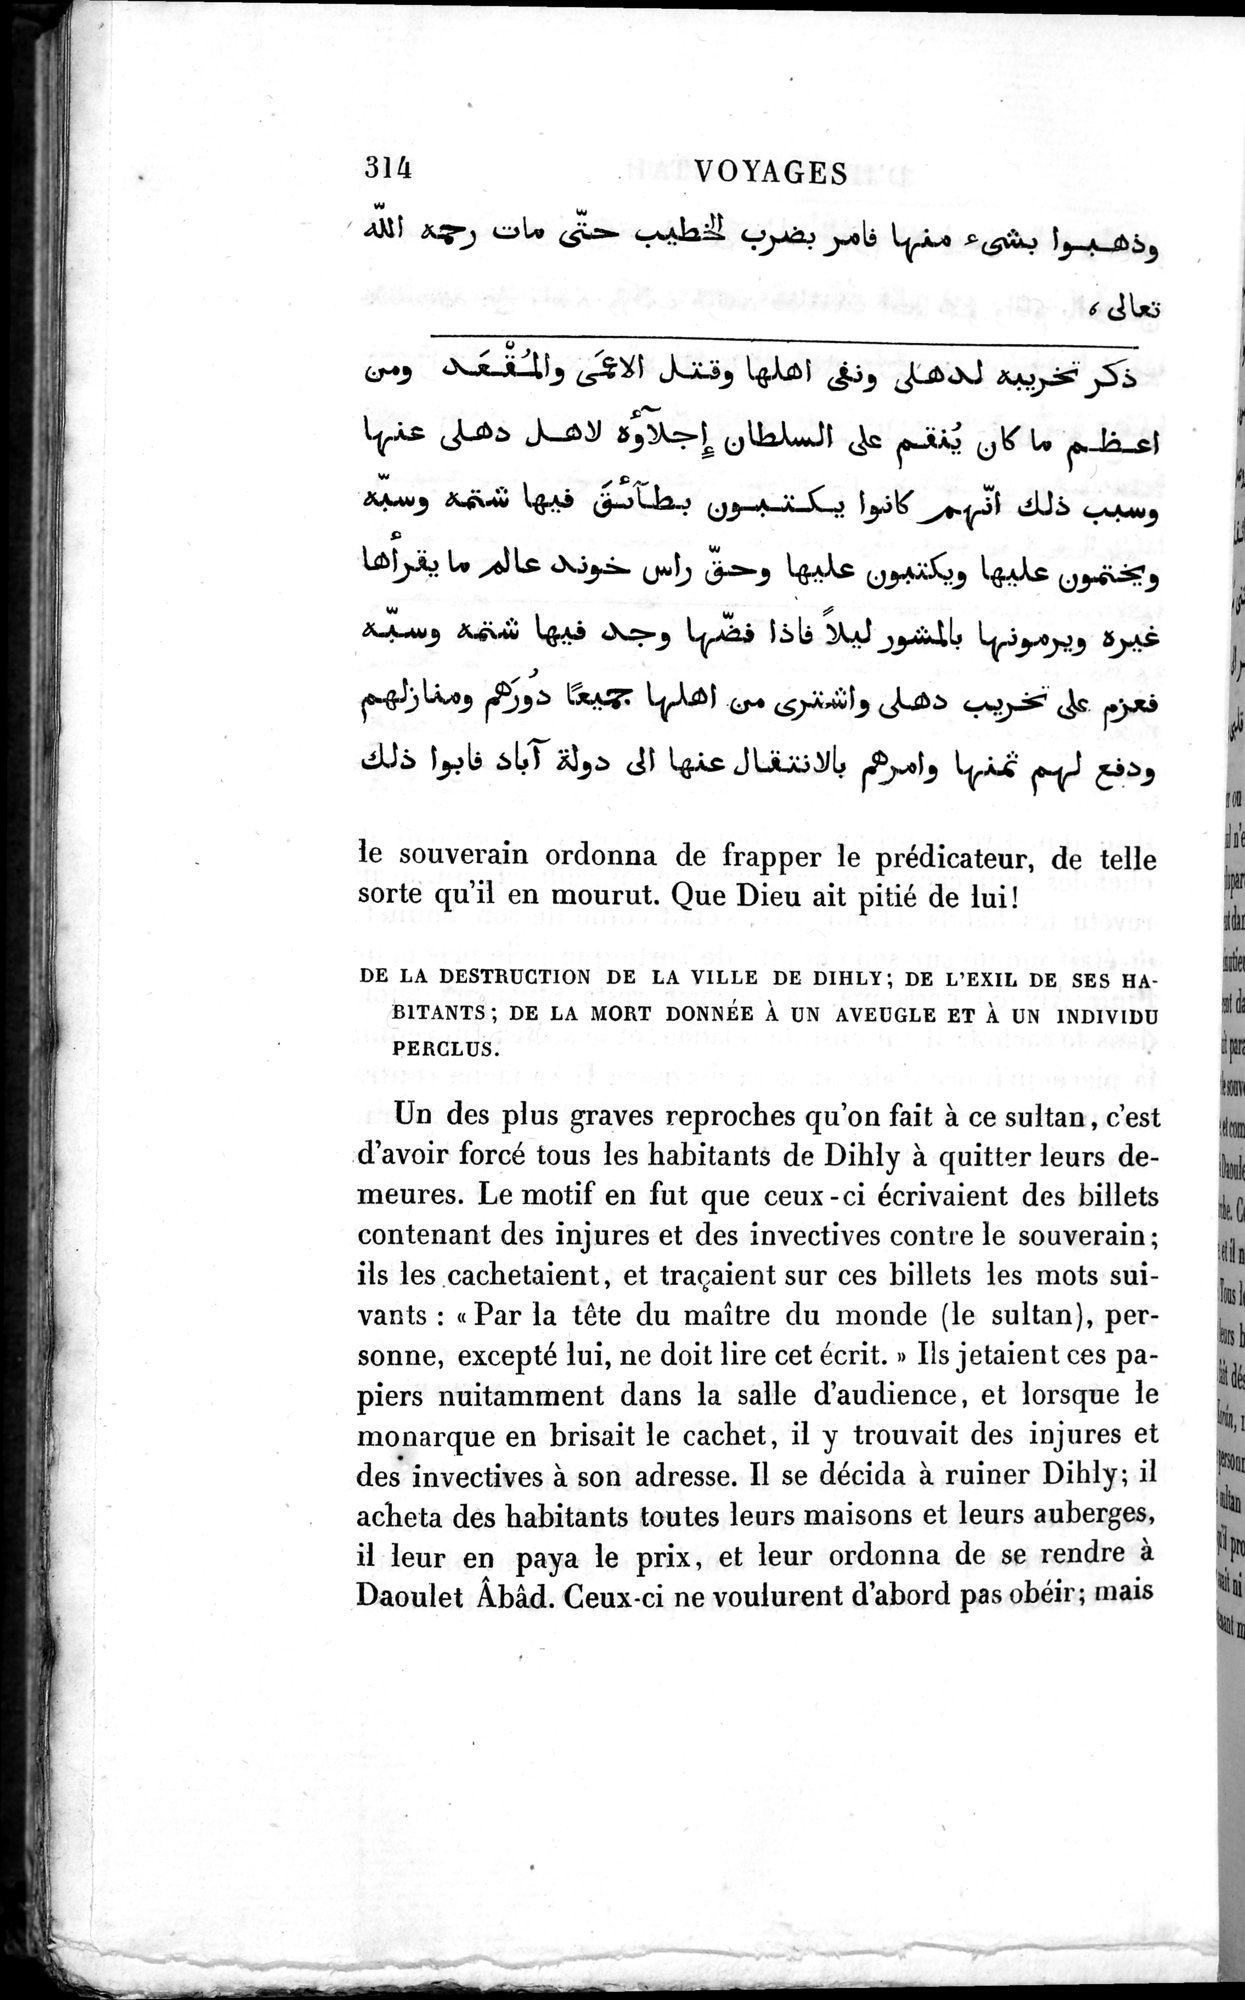 Voyages d'Ibn Batoutah : vol.3 / Page 354 (Grayscale High Resolution Image)